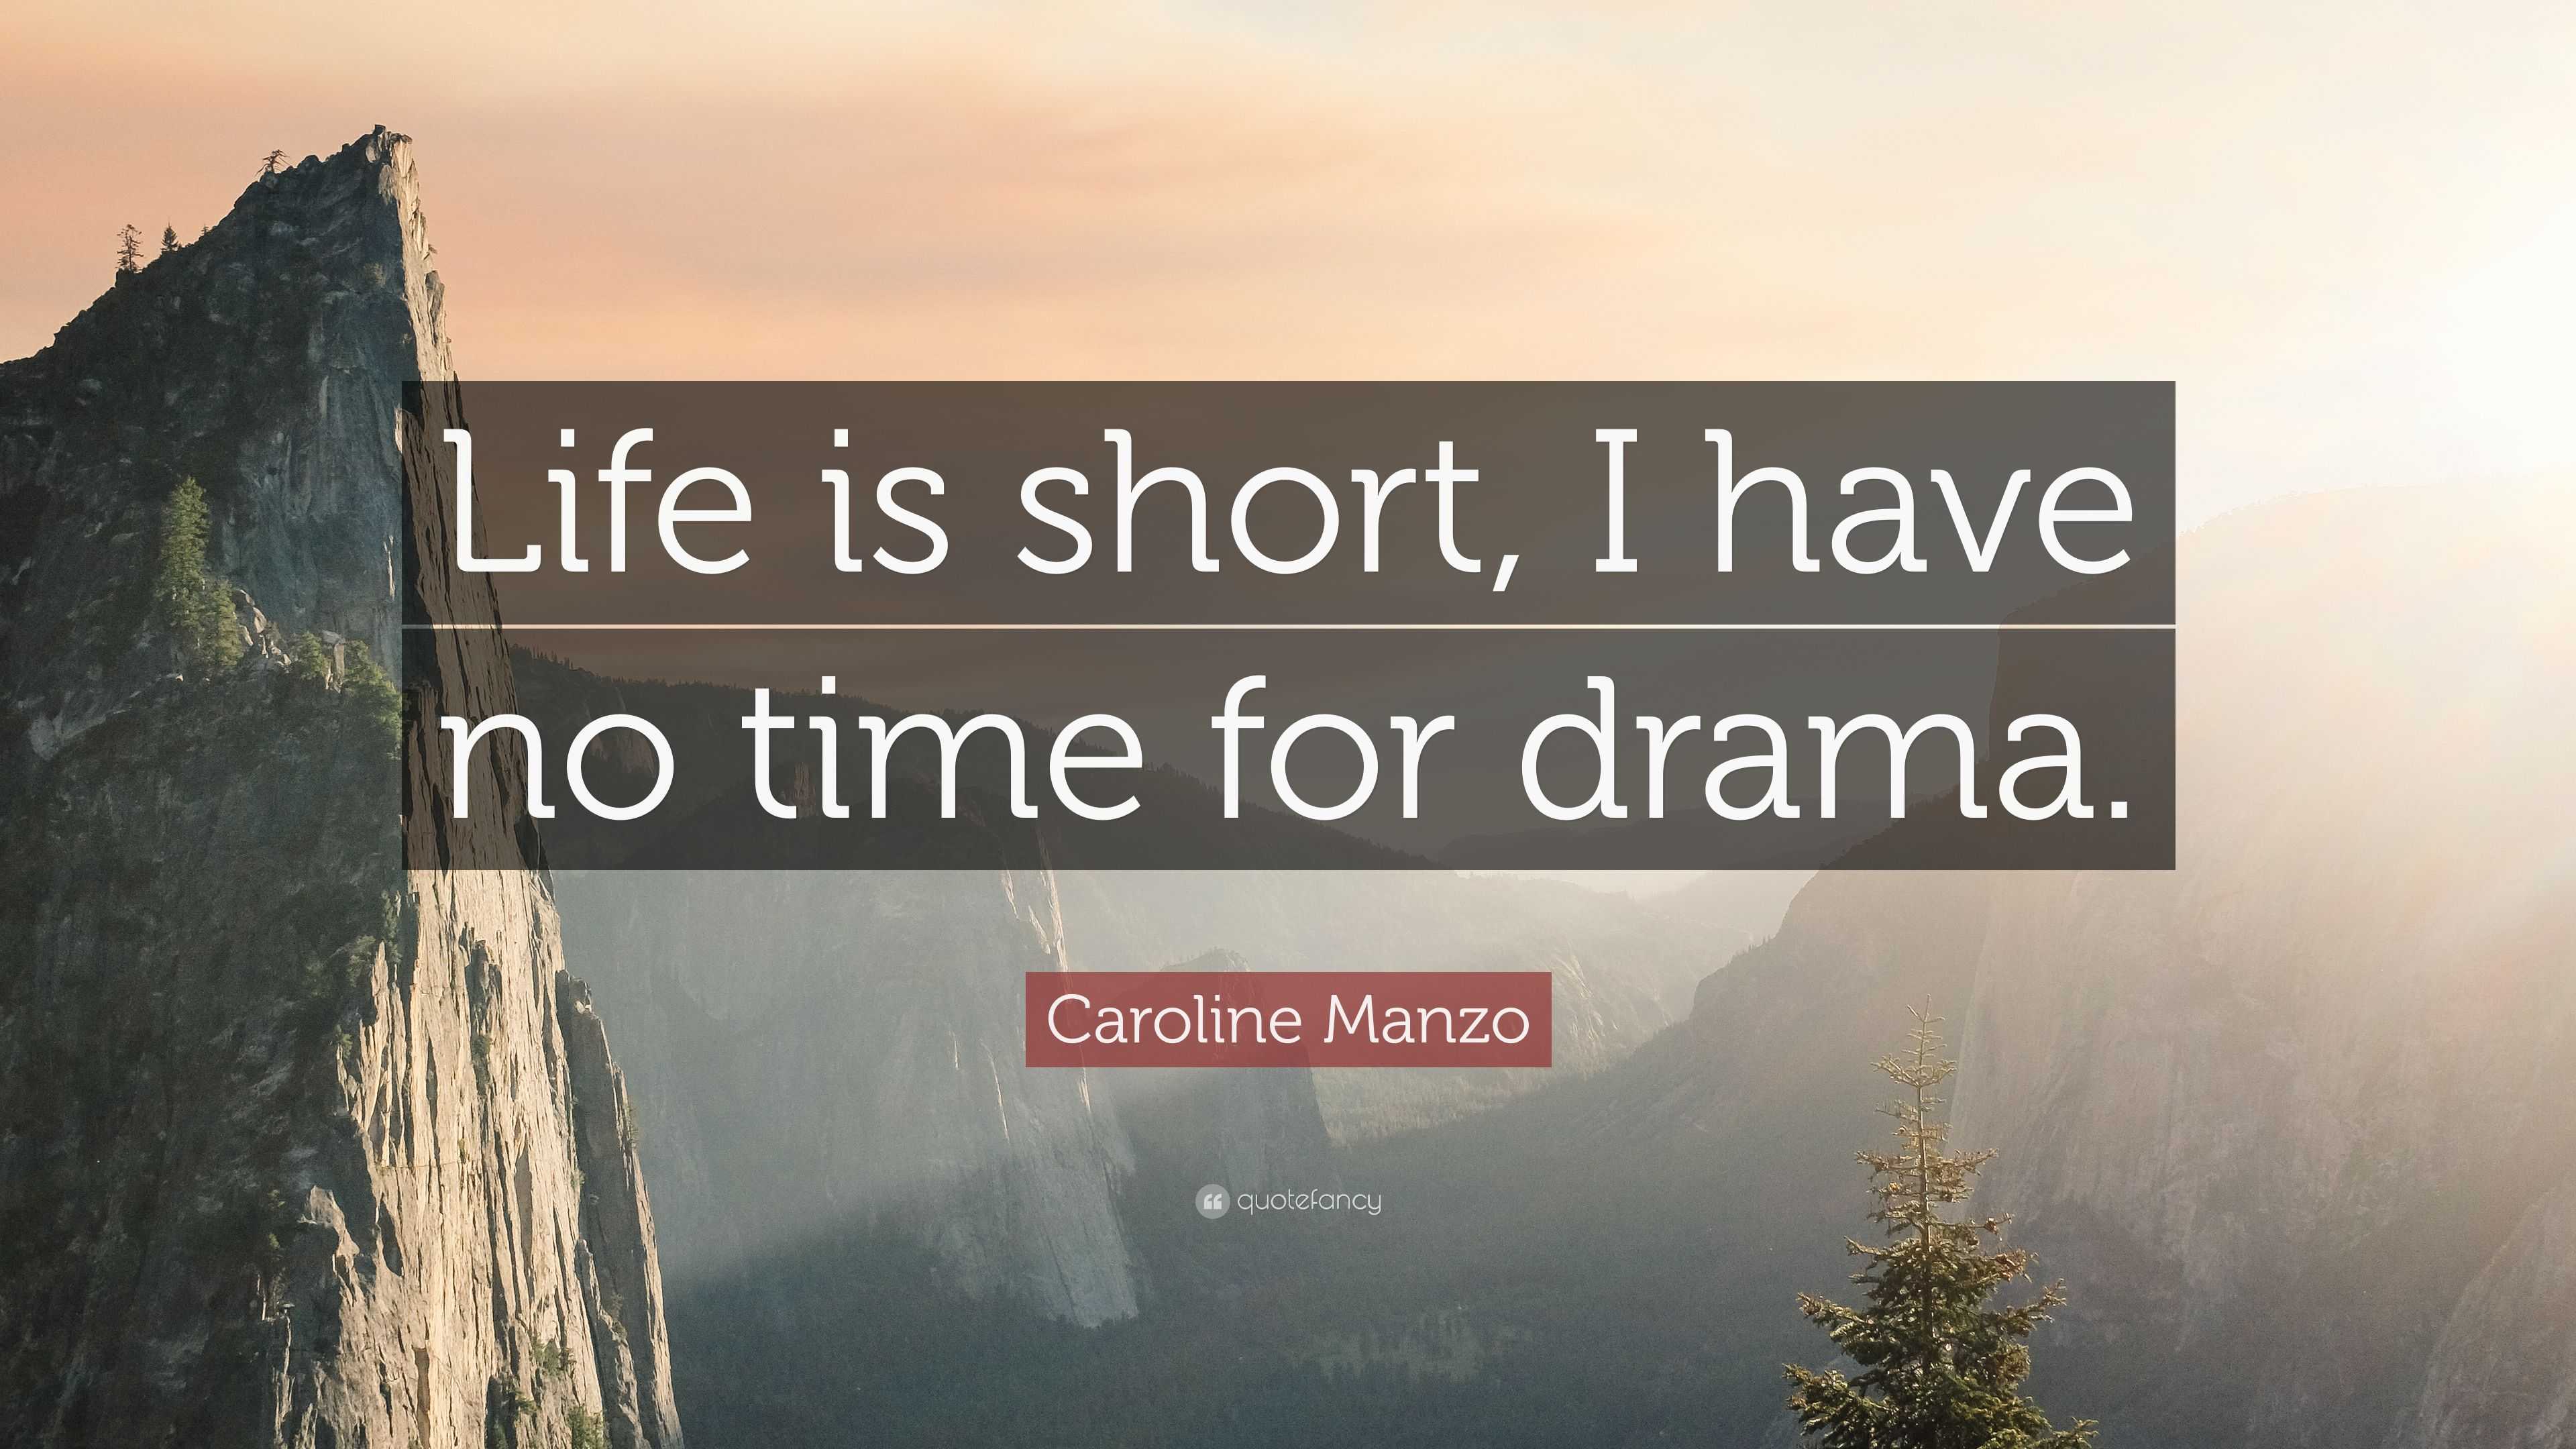 Caroline Manzo Quote: “Life is short, I have no time for drama.”